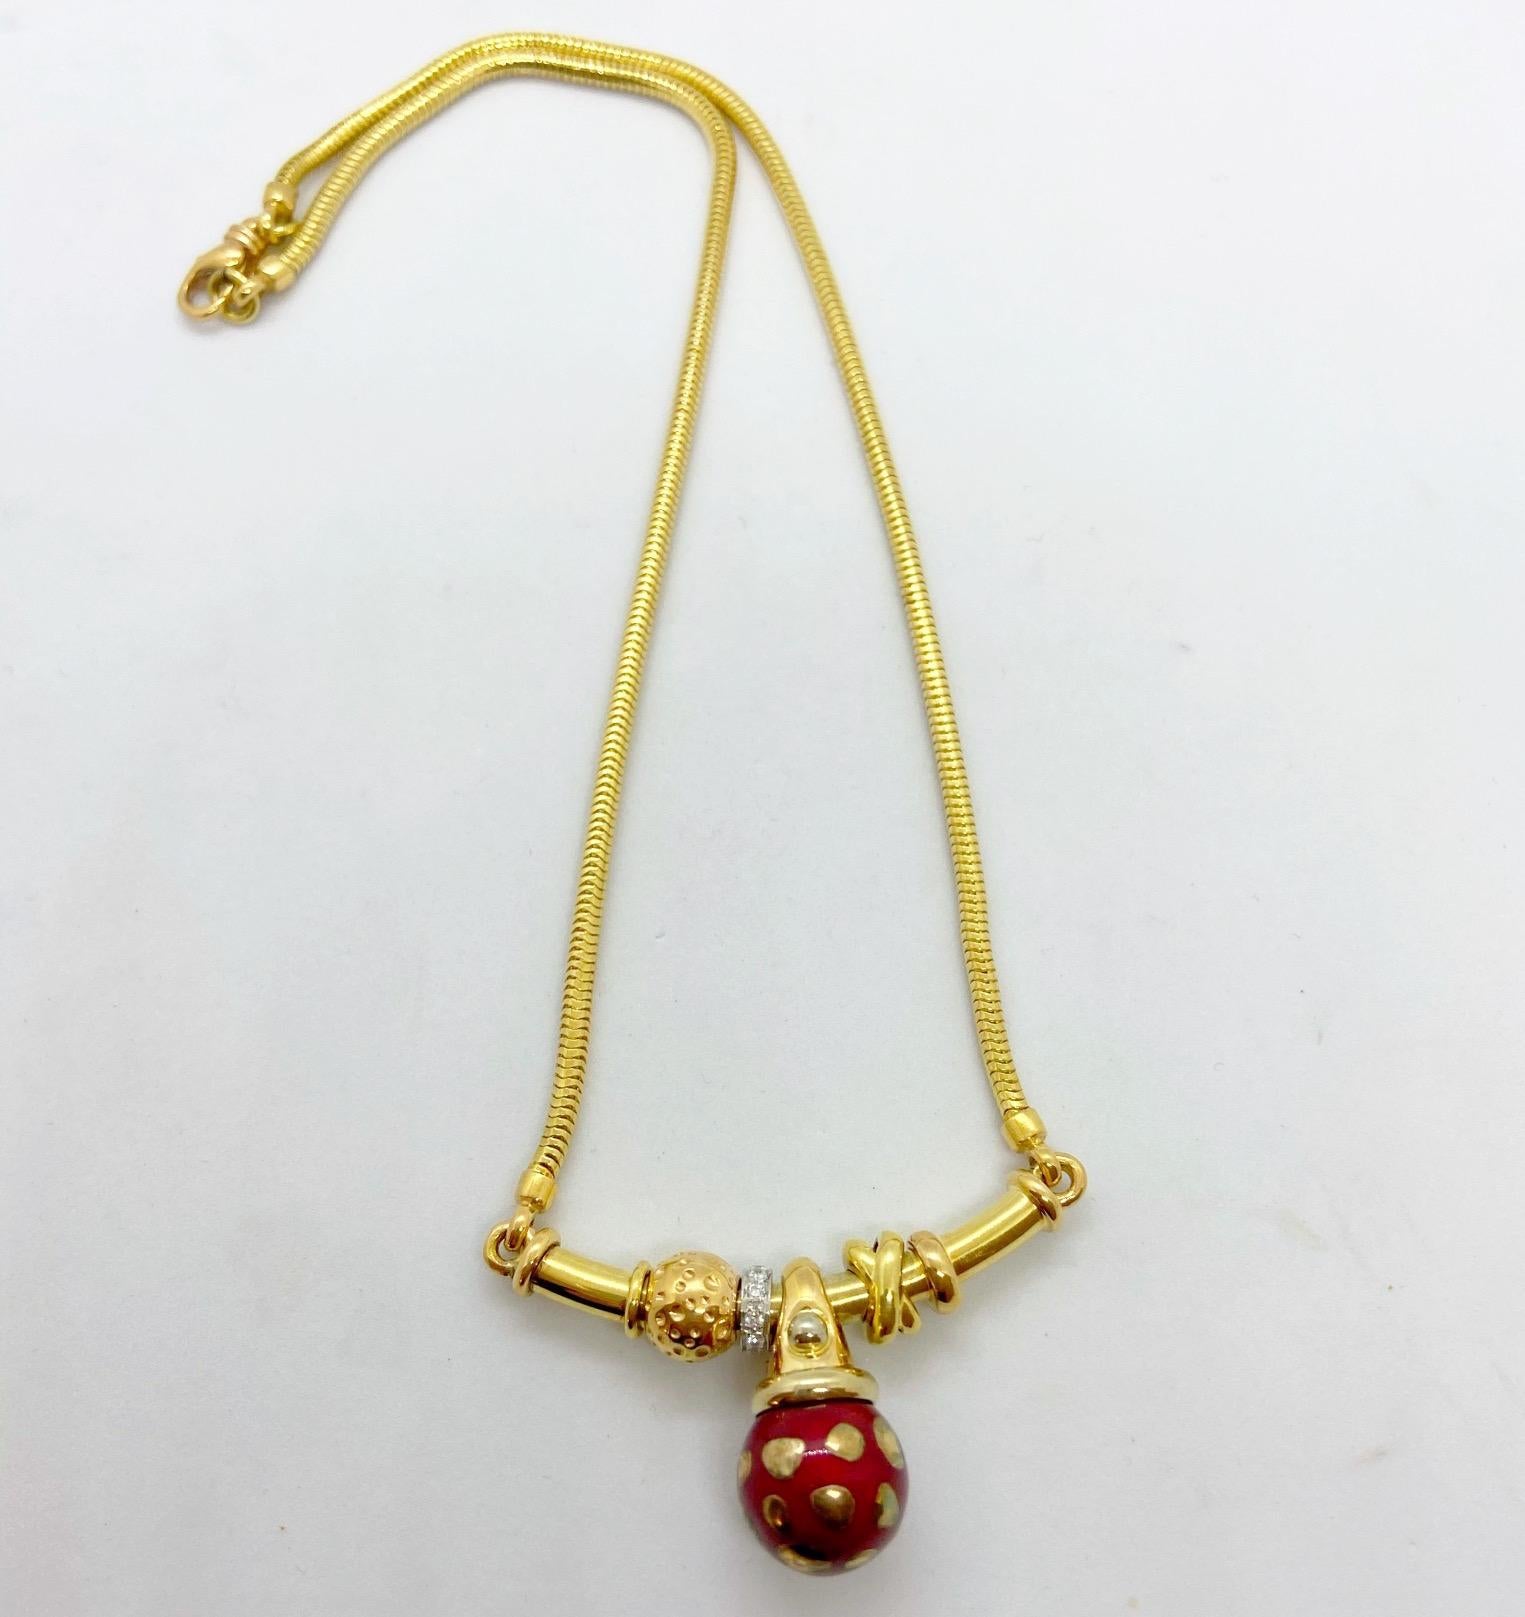 Contemporary La Nouvelle Bague 18 Karat Gold Necklace with Red Enamel Ball and Diamonds